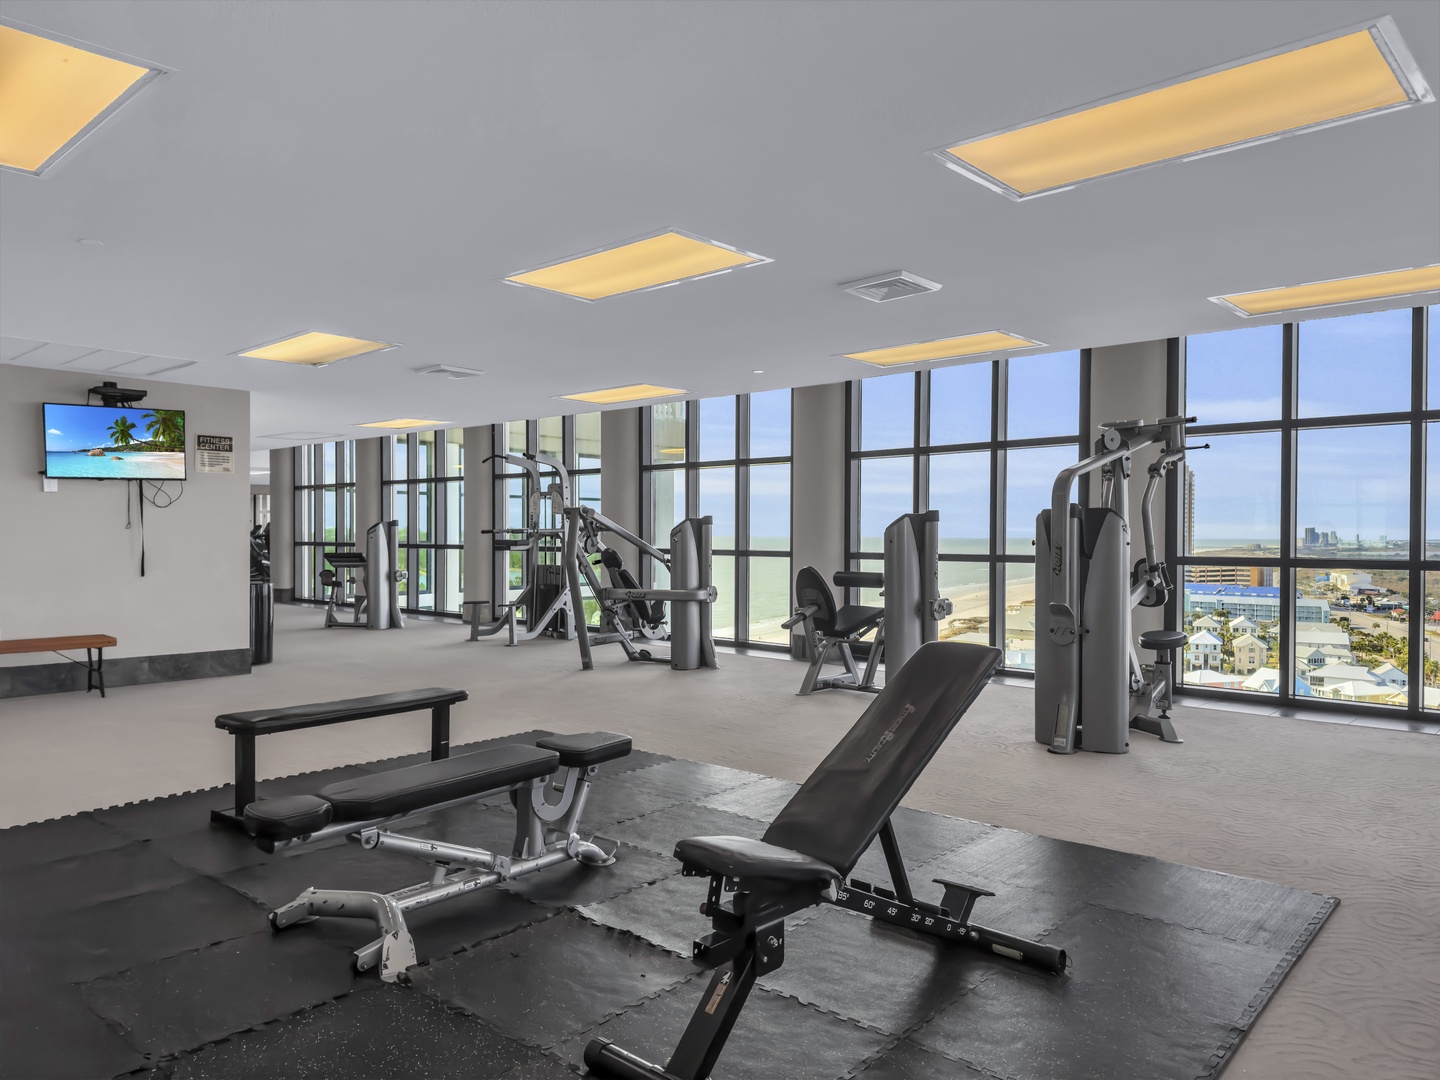 Onsite fitness center located on the 15th floor